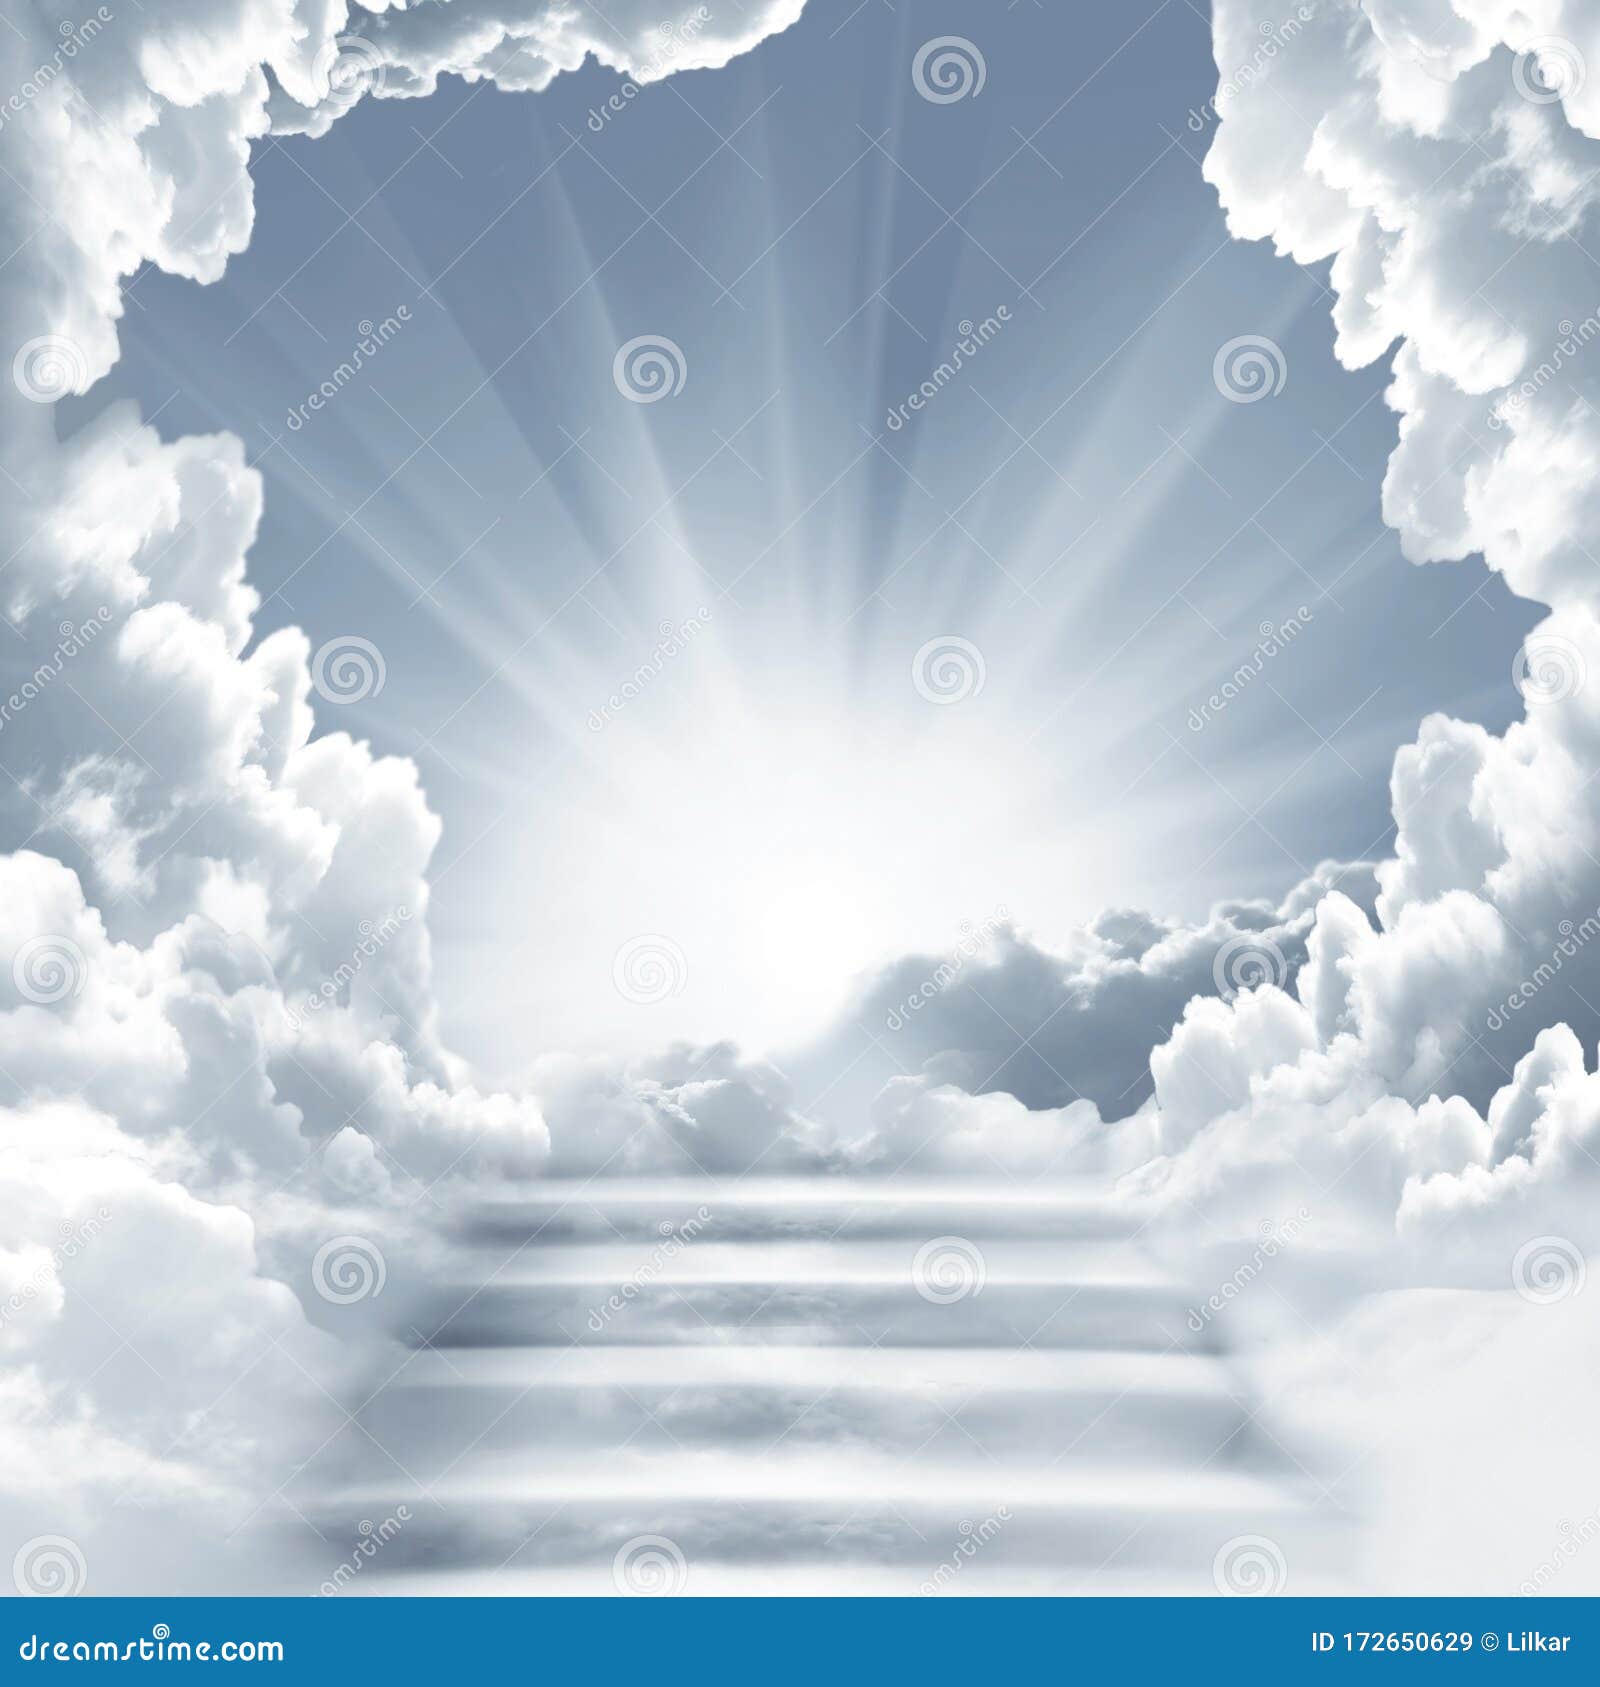 Stairway to heaven/success stock image. Image of road - 25793241